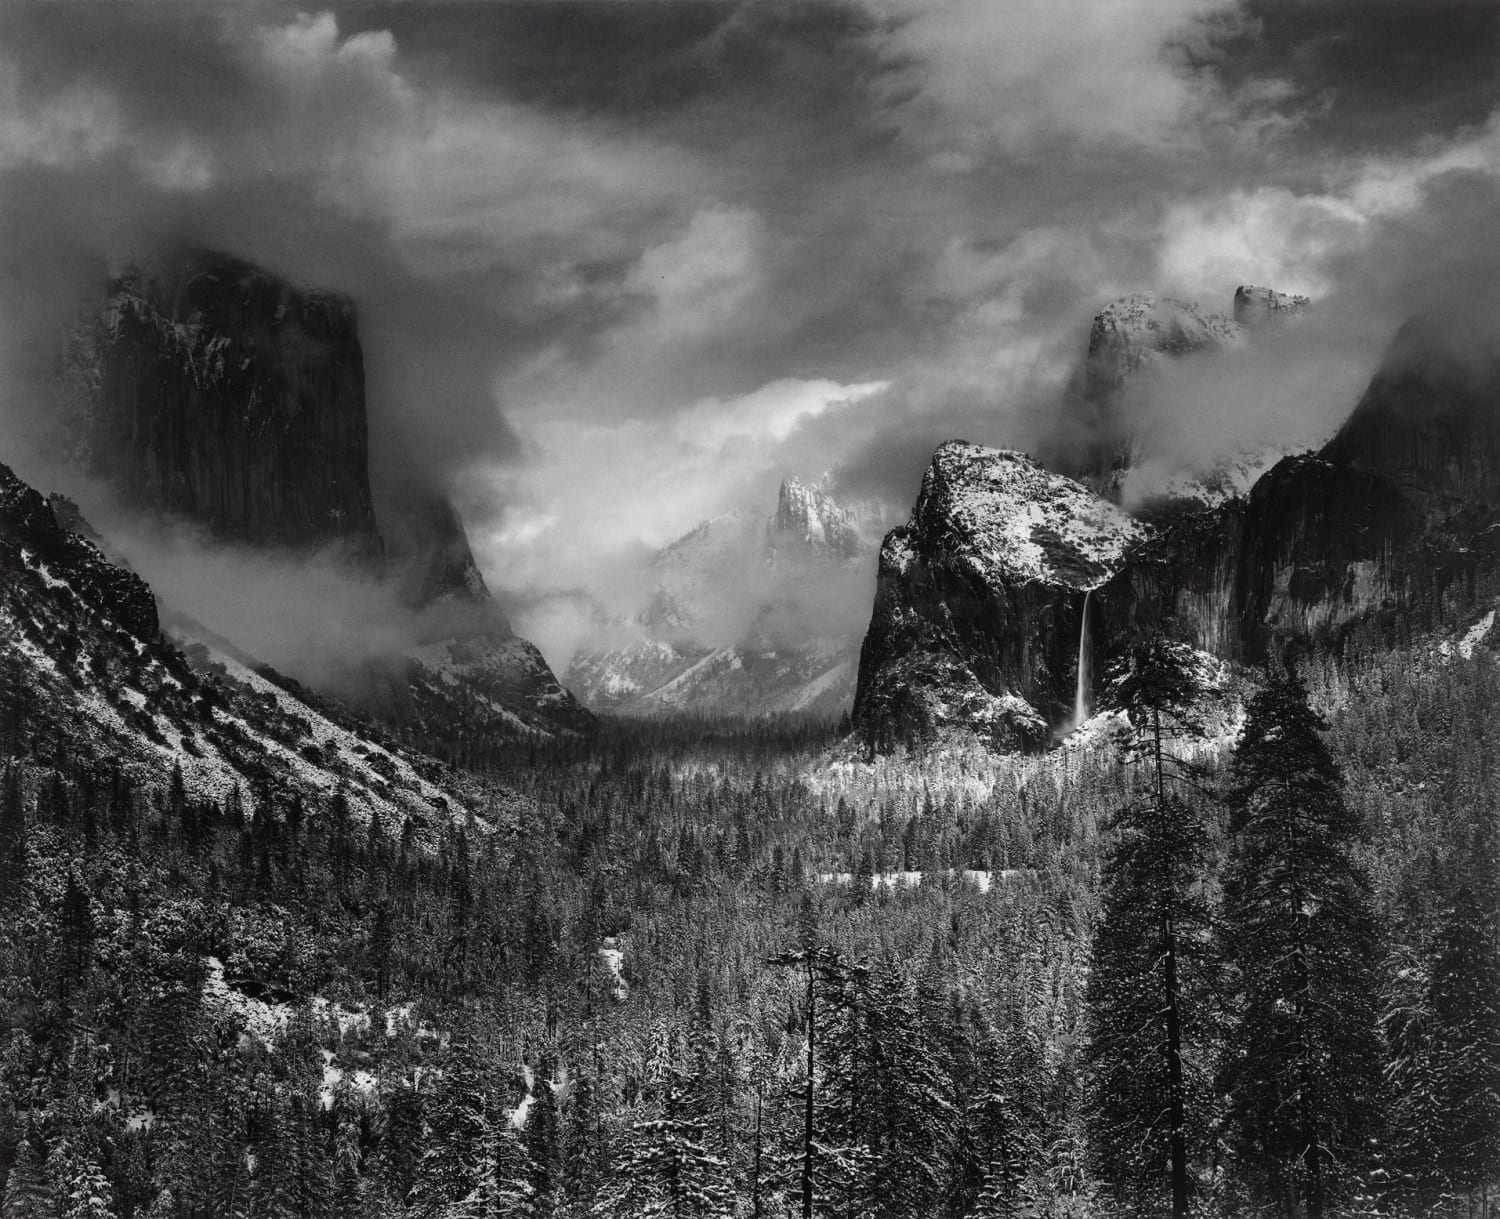 “Not seeing everything at once entices the imagination; an undefined horizon invites us to possibilities of the views beyond.” On Yosemite National Park's 130th anniversary, rock climber @conrad_anker reflects on photos in our collection: https://t.co/ZQ4Xc87nAg Ansel Adams